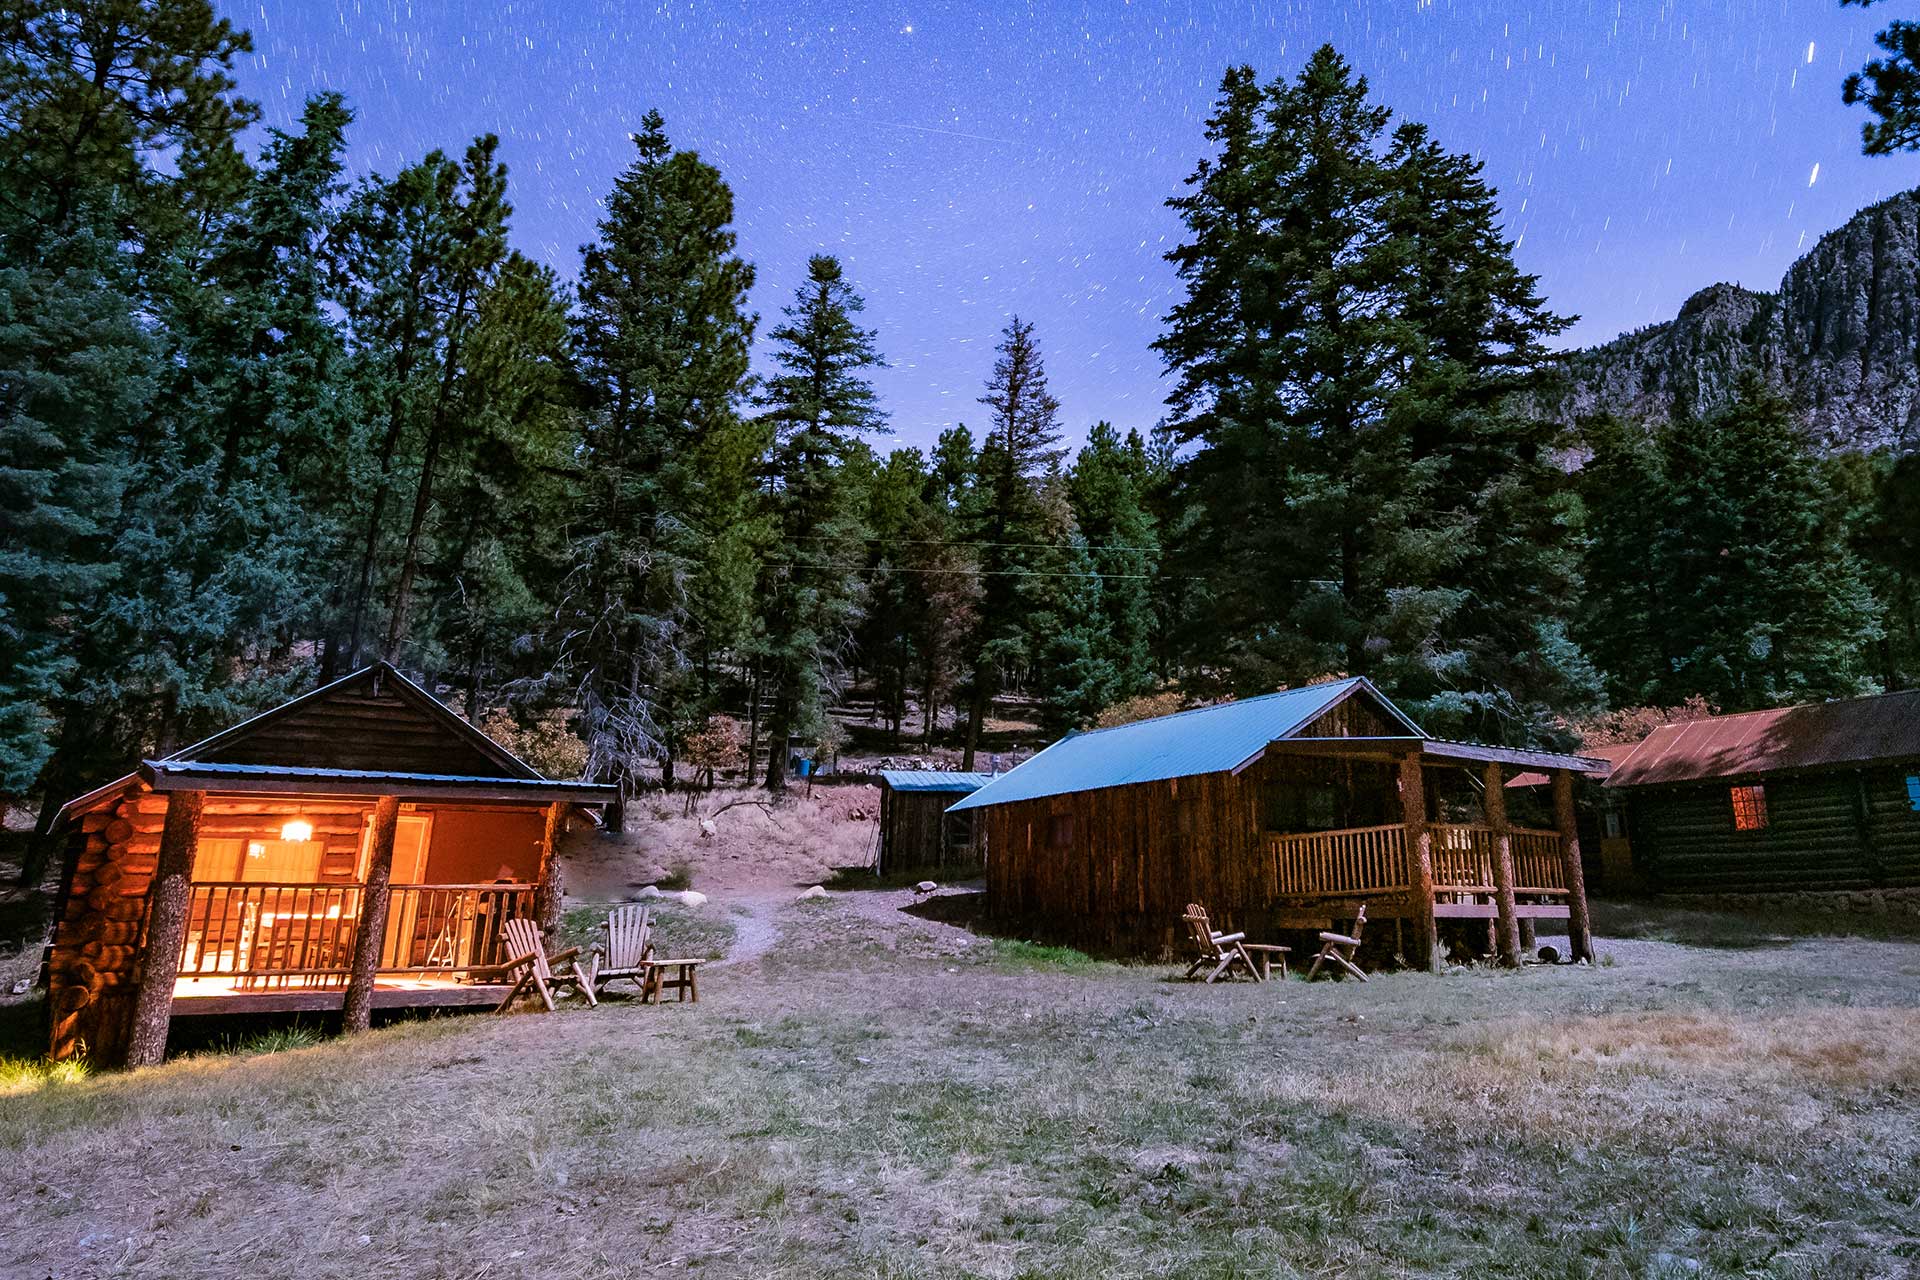 3 log cabins at night with pine trees and stars in blue sky